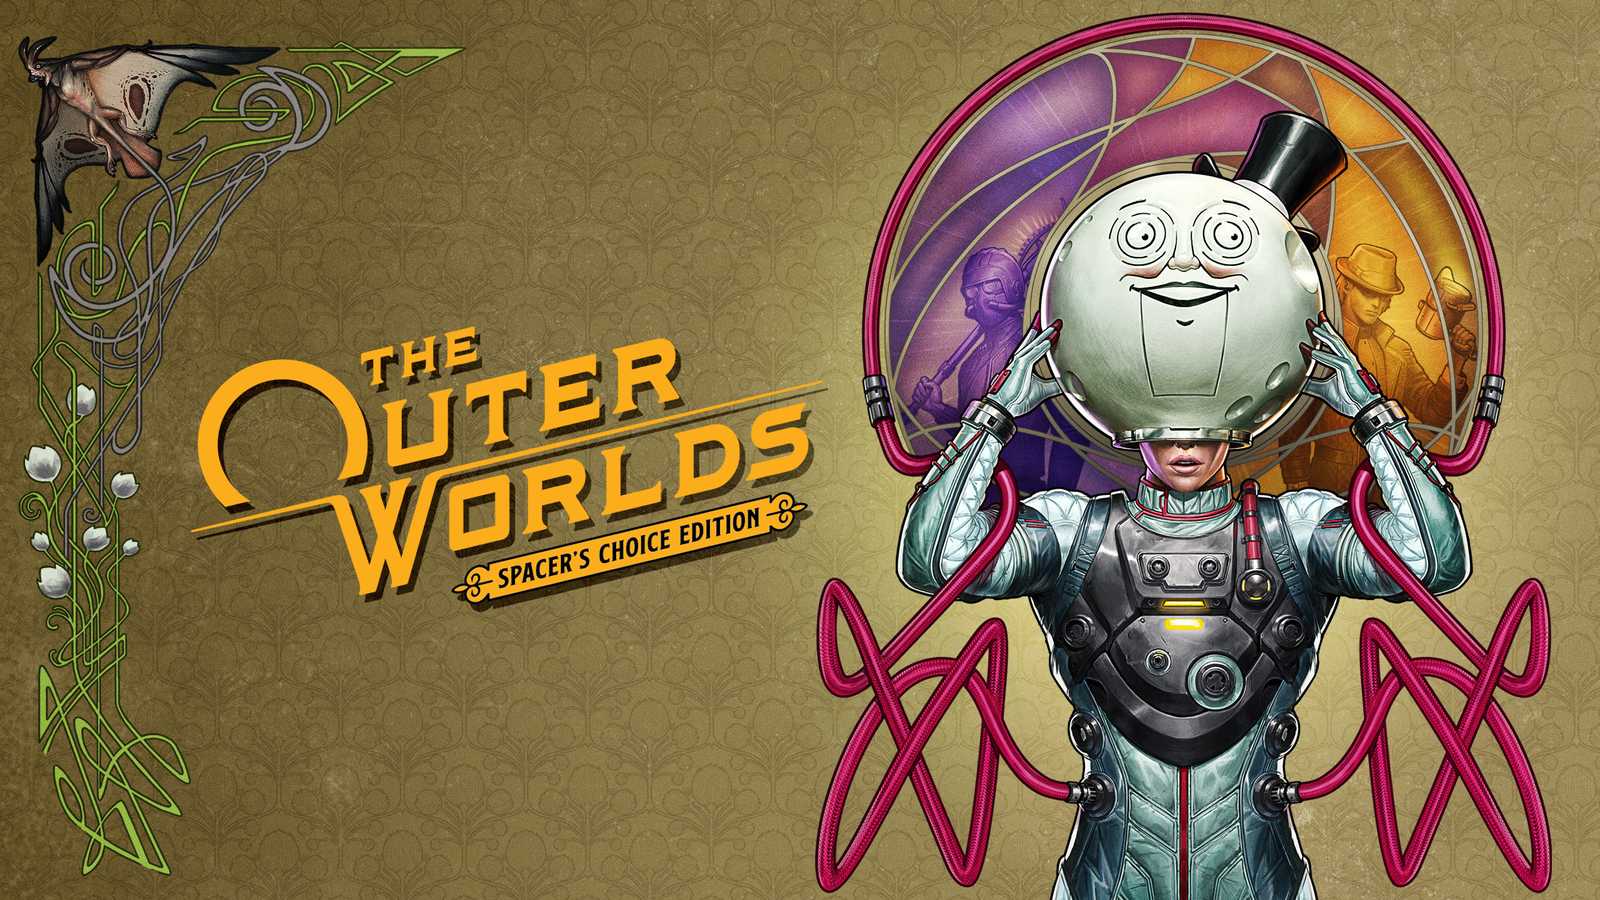 The Outer Worlds Spacer's Choice Edition - Bon RPG, mauvais portage